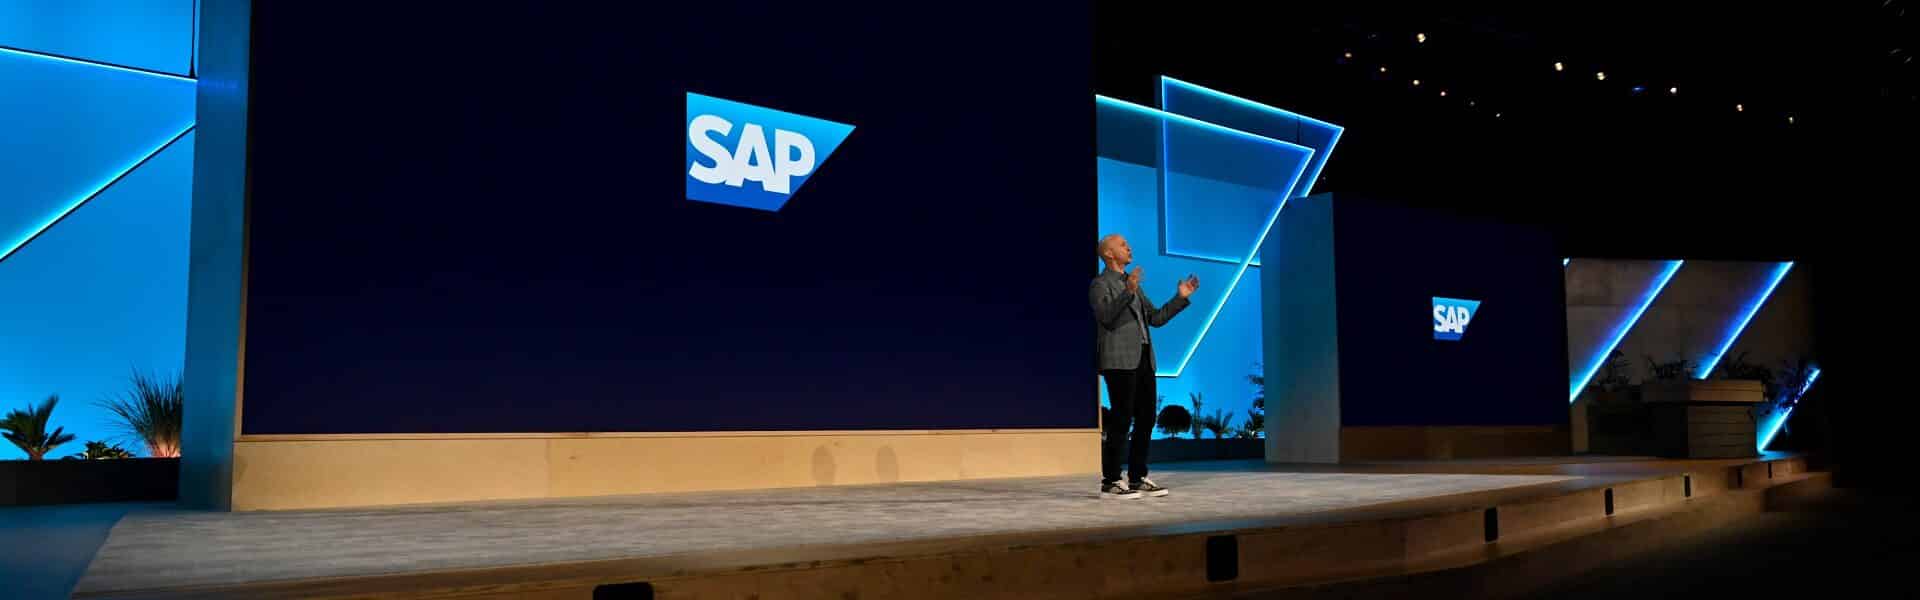 Customers Trust SAP to Future-Proof Their Business